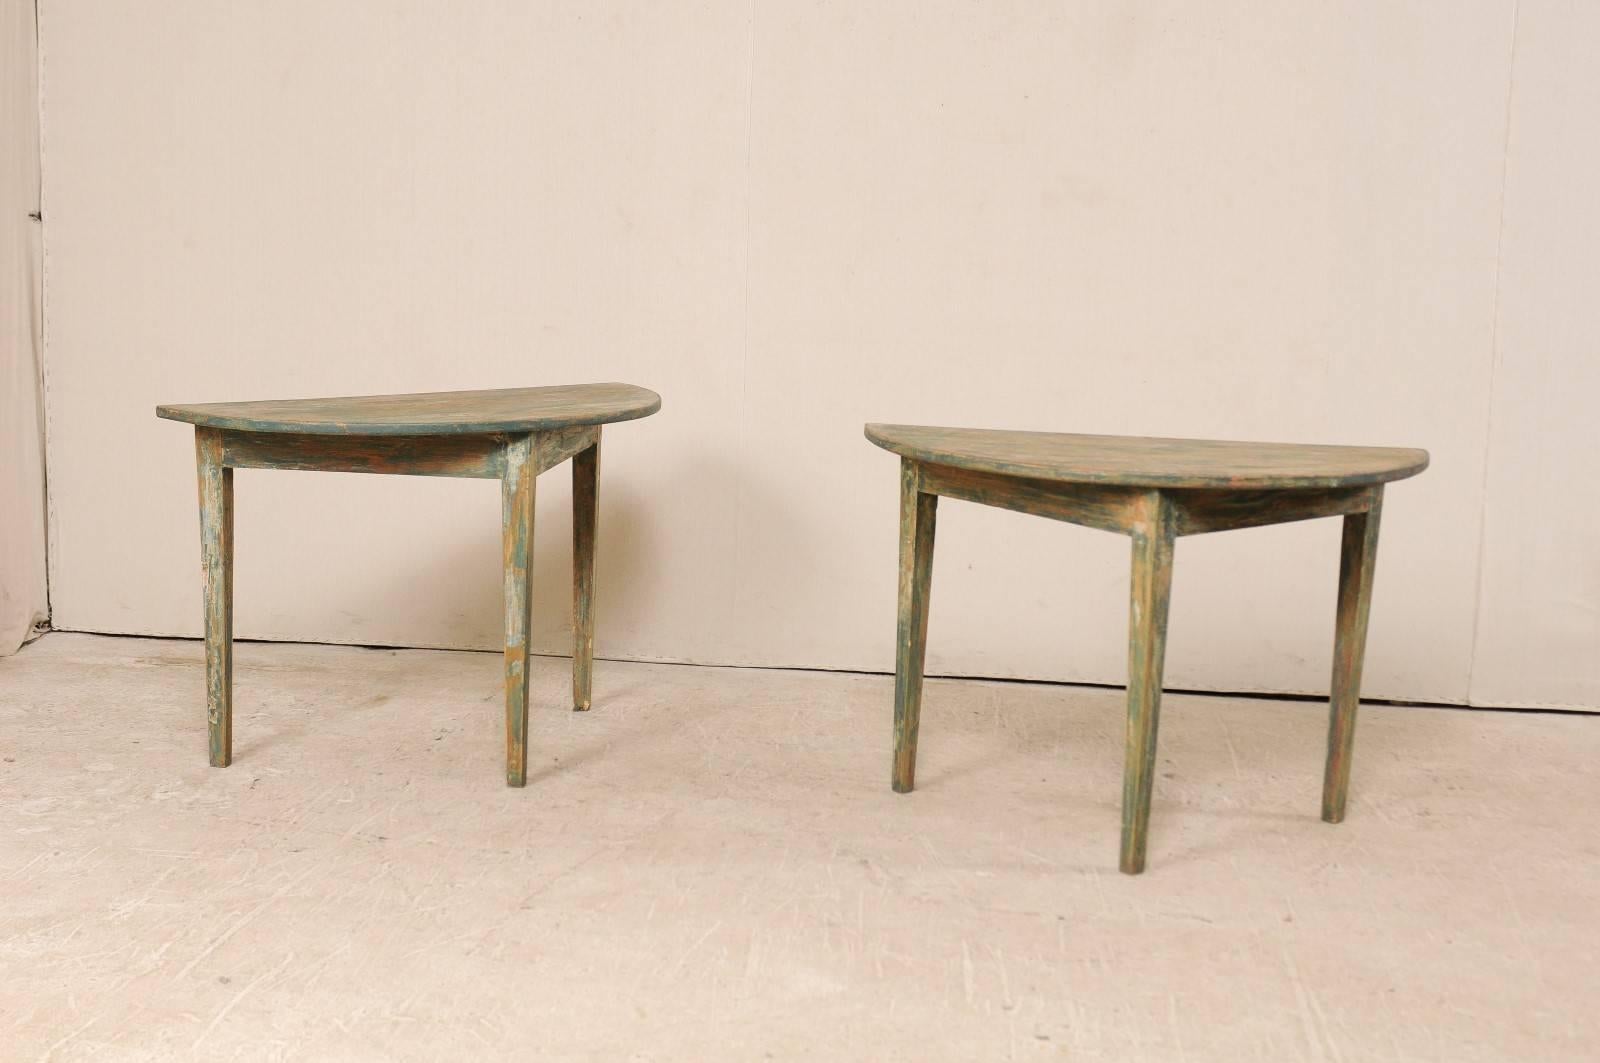 A pair of 19th century Swedish painted wood demilune tables. This pair of Swedish demilune tables from the 1880s features a semi-circular top over a triangular shaped apron. These demilune tables are each raised upon three squared and gently tapered